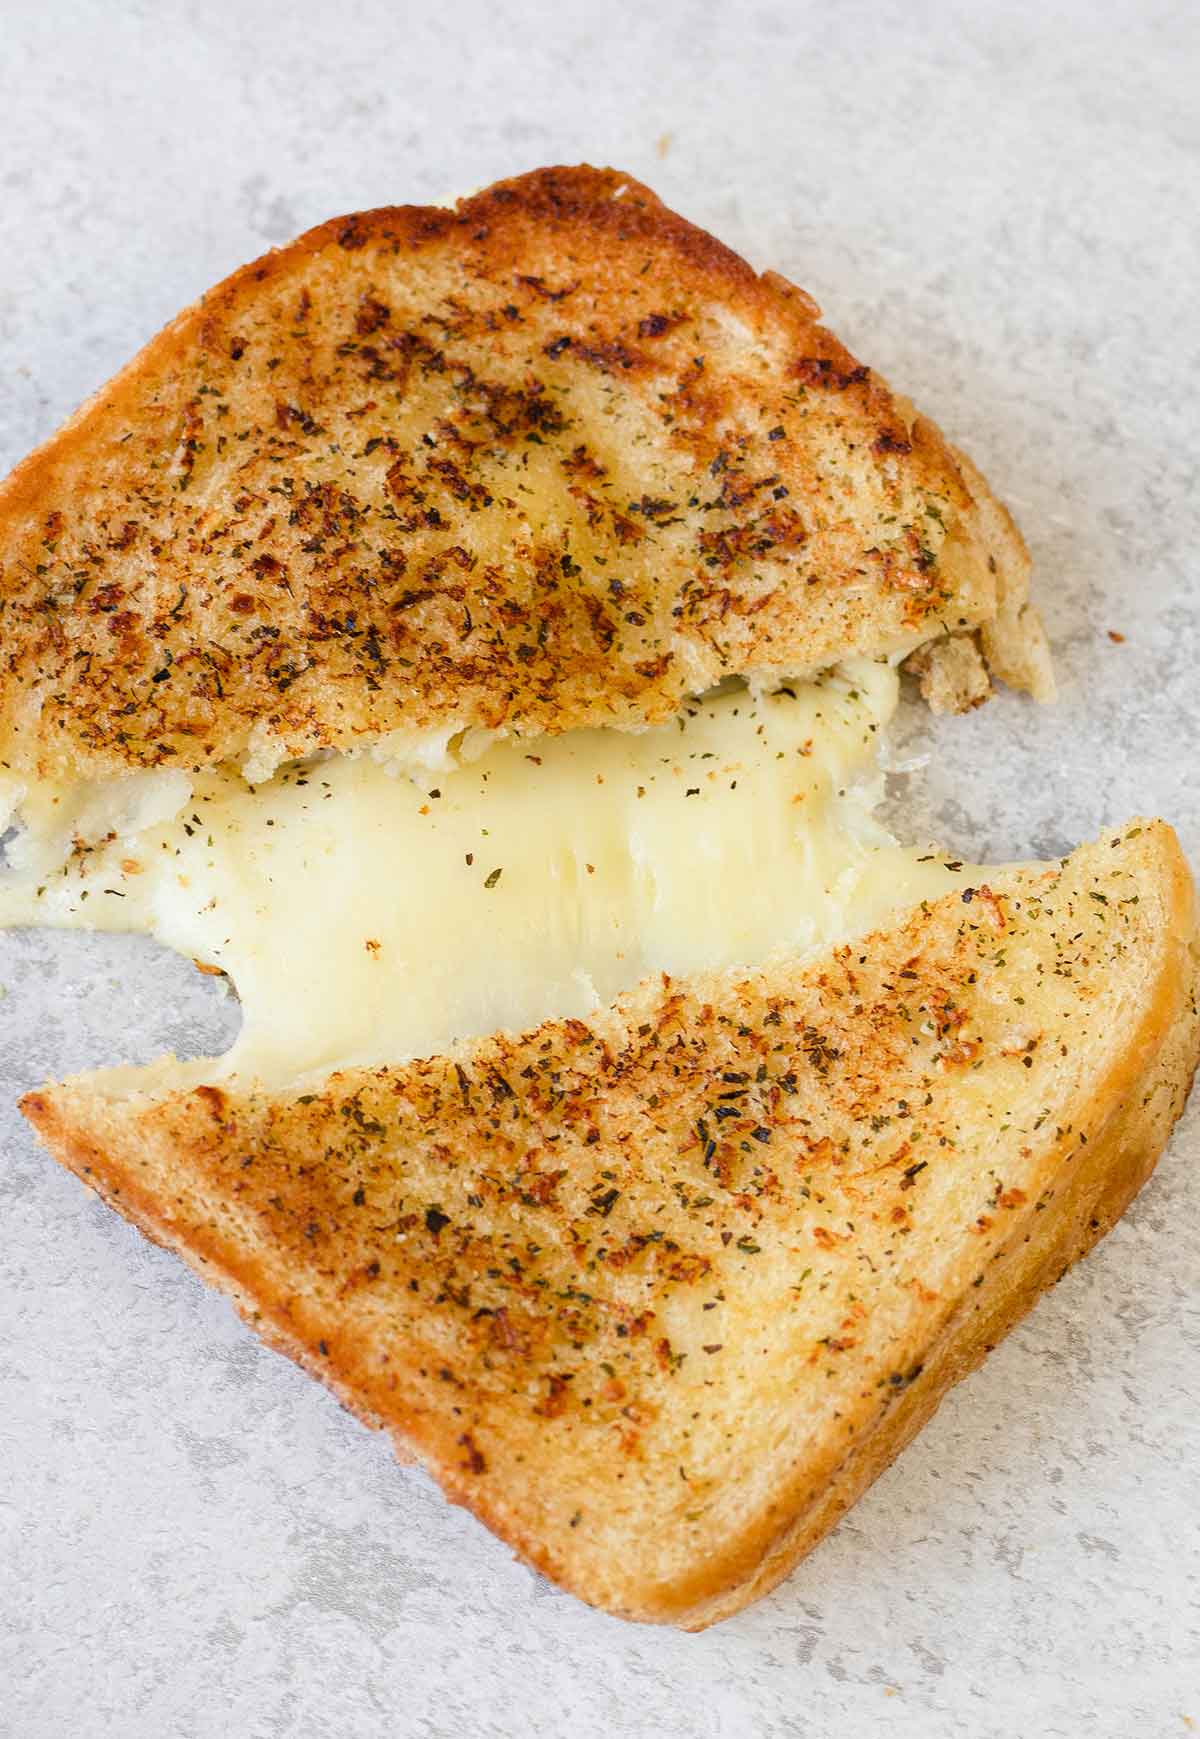 Cut the garlic bread grilled cheese sandwich into halves.